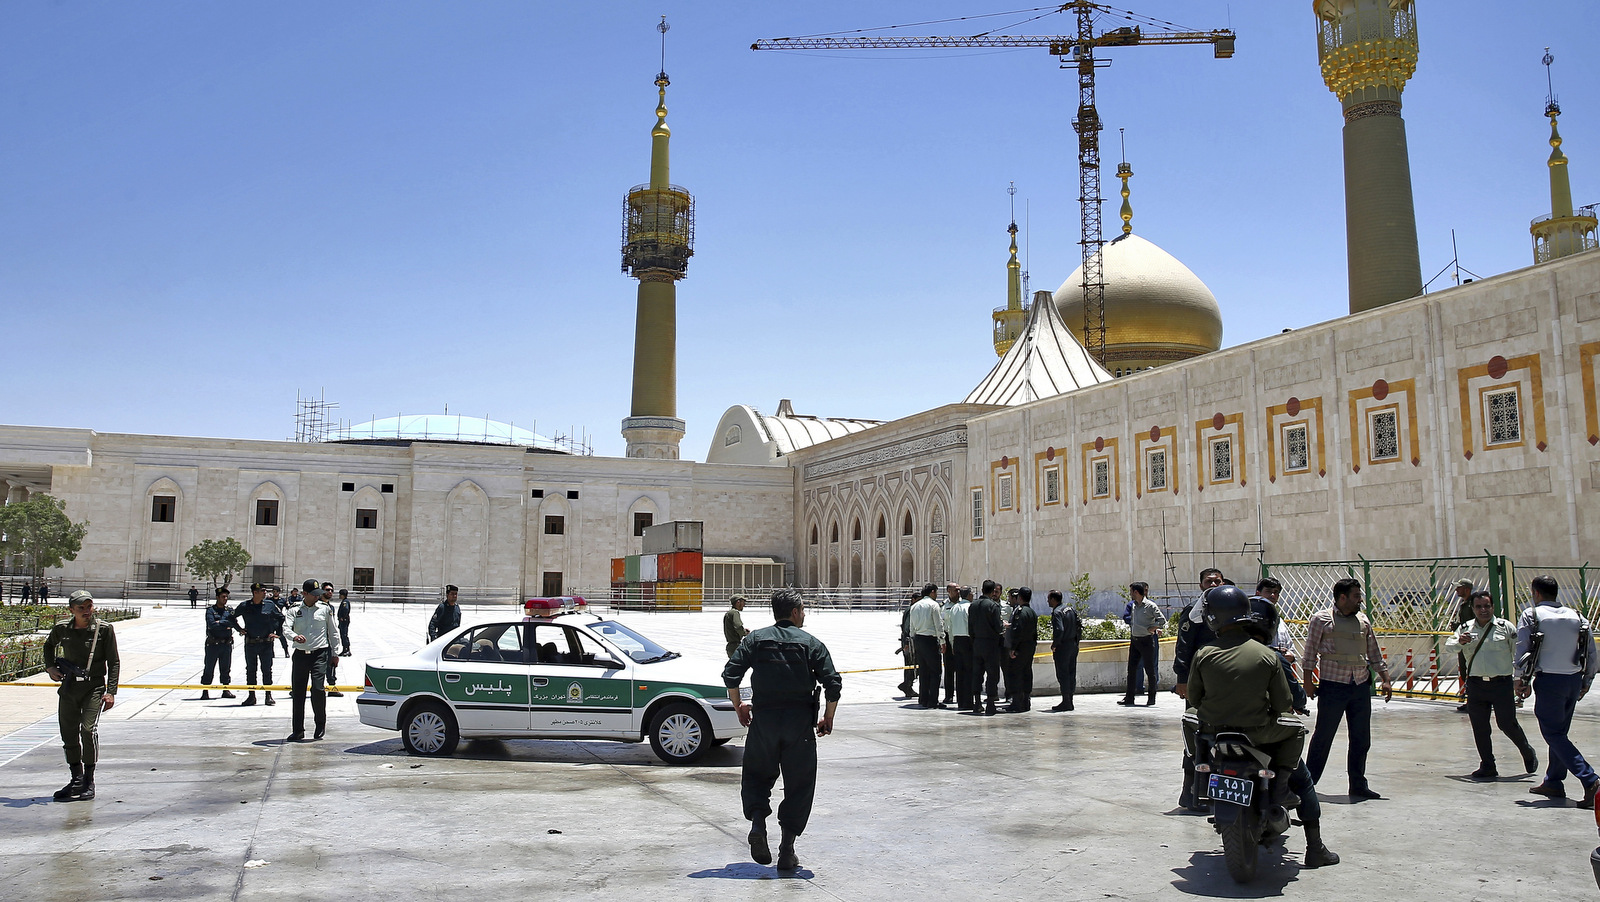 Police secure the scene around of shrine of late Iranian revolutionary founder Ayatollah Khomeini, after an assault by several attackers in Tehran, Iran, June 7, 2017. Suicide bombers and gunmen stormed into Iran's parliament and targeted the shrine of Ayatollah Ruhollah Khomeini on Wednesday, killing a security guard and wounding several other people in rare twin attacks, with the siege at the legislature still underway. (AP/Ebrahim Noroozi)